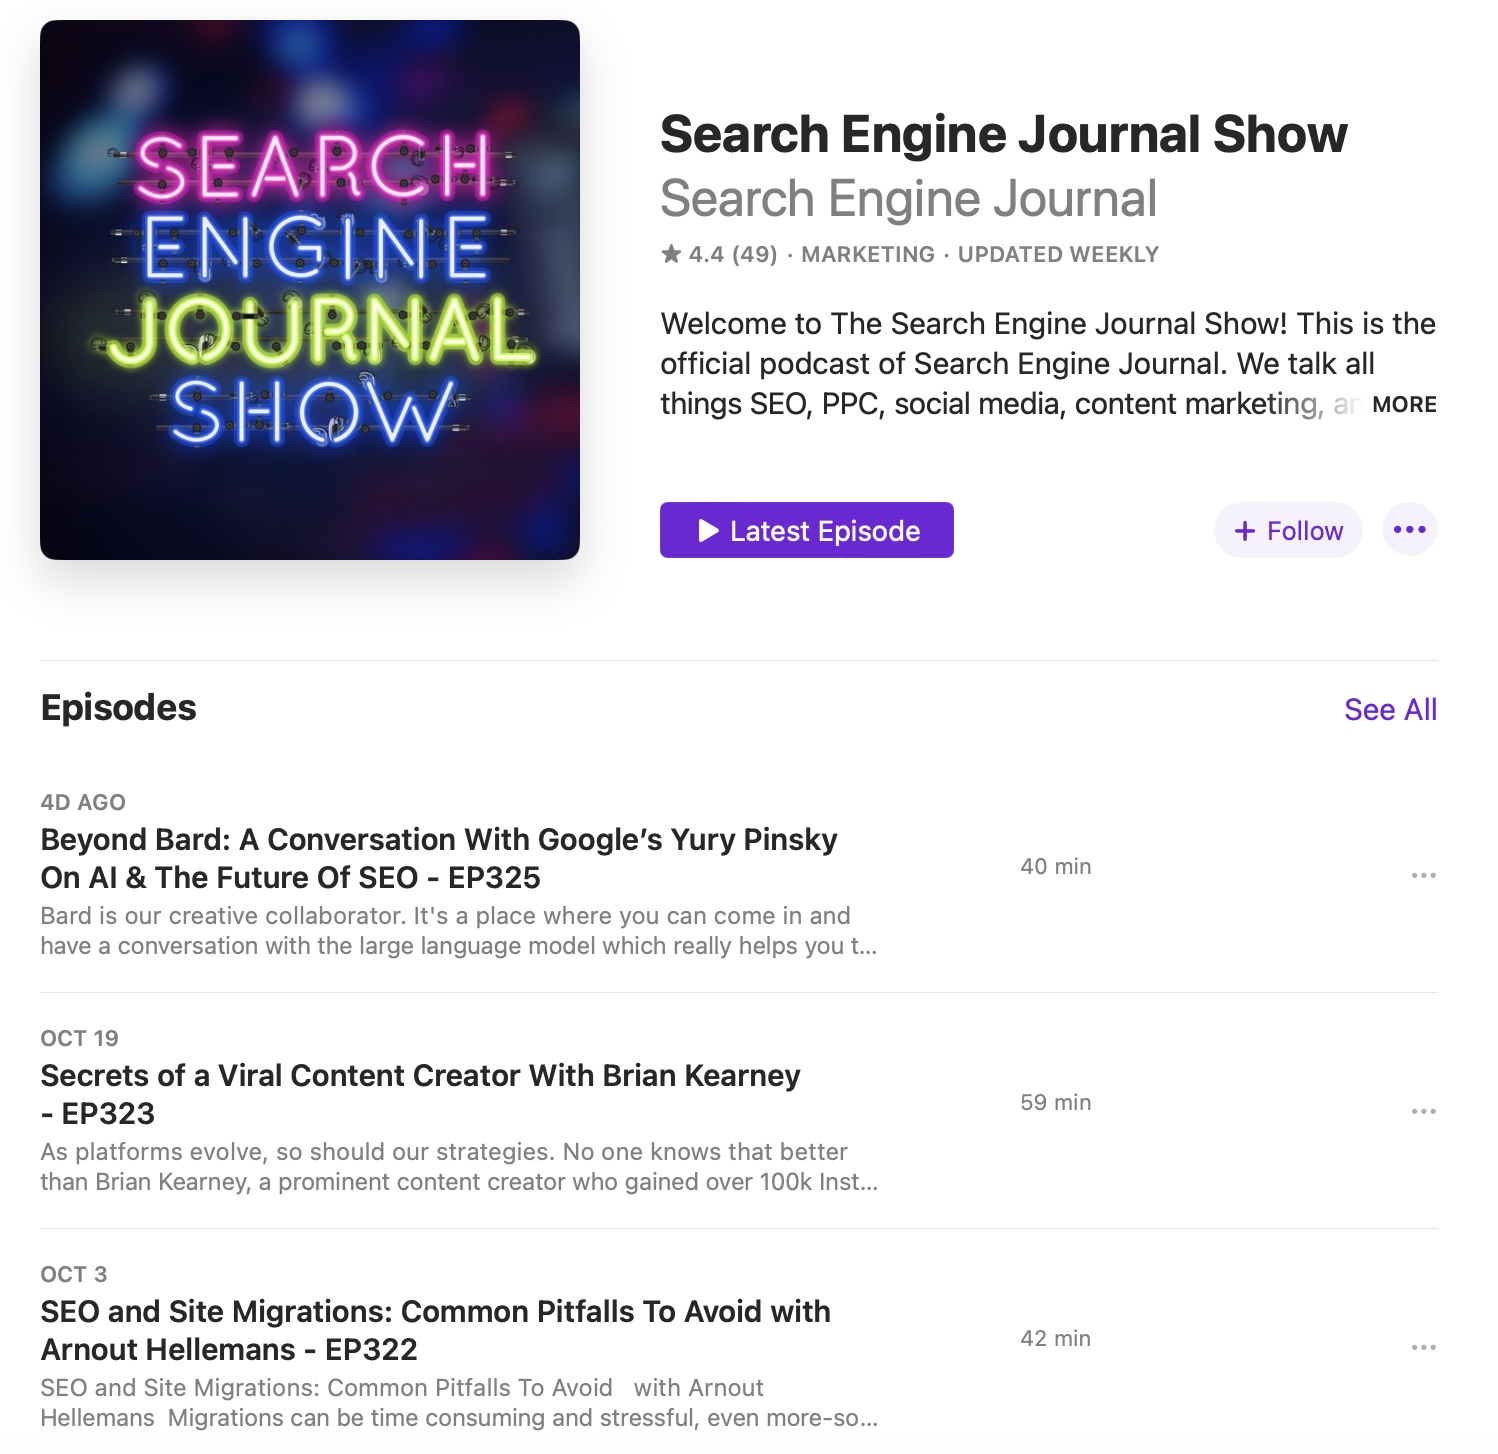 Search Engine Journal Show podcast page